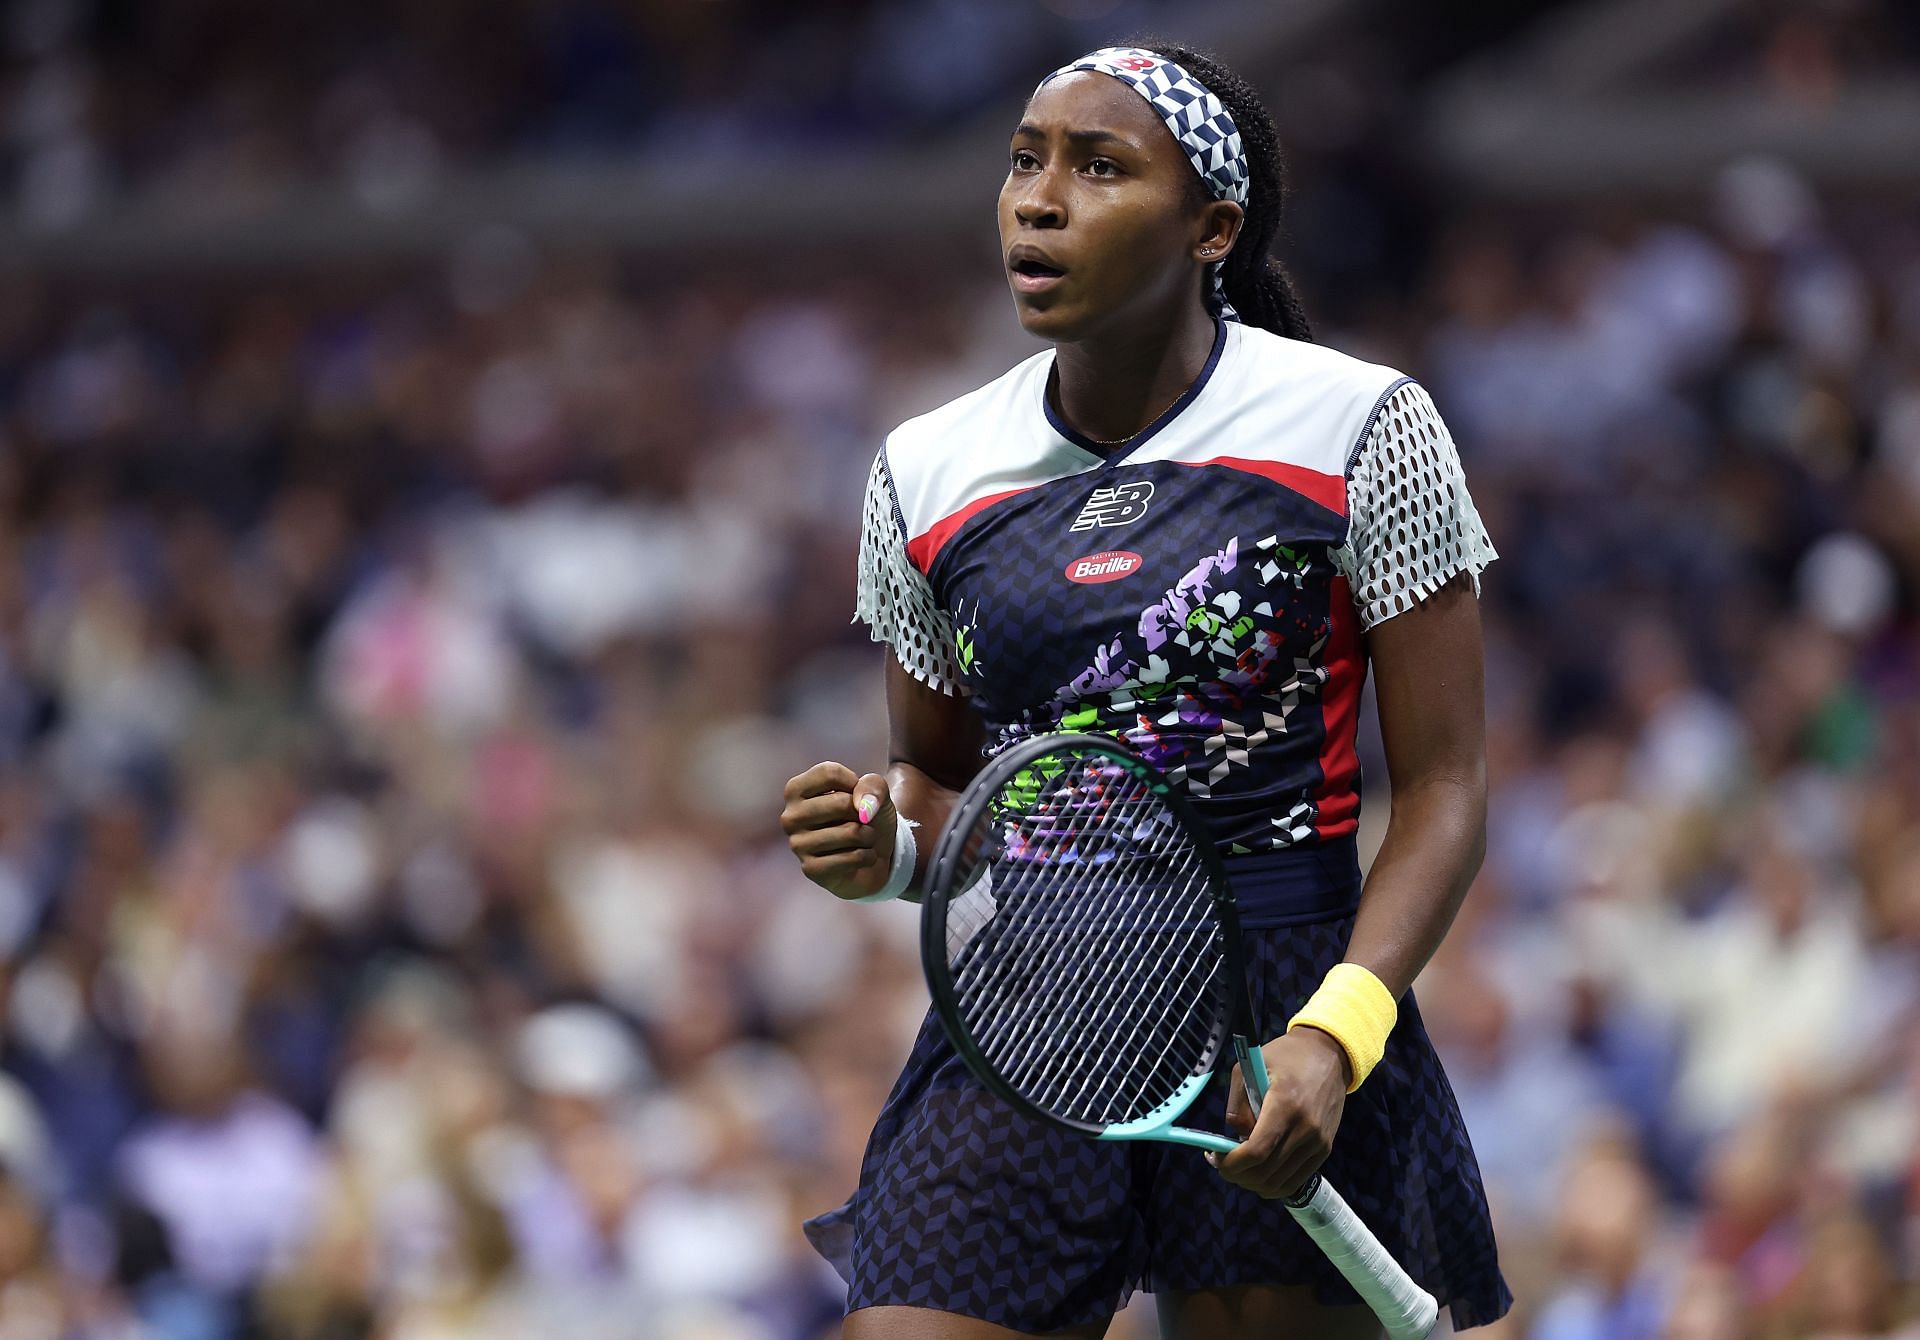 Coco Gauff at the 2022 US Open